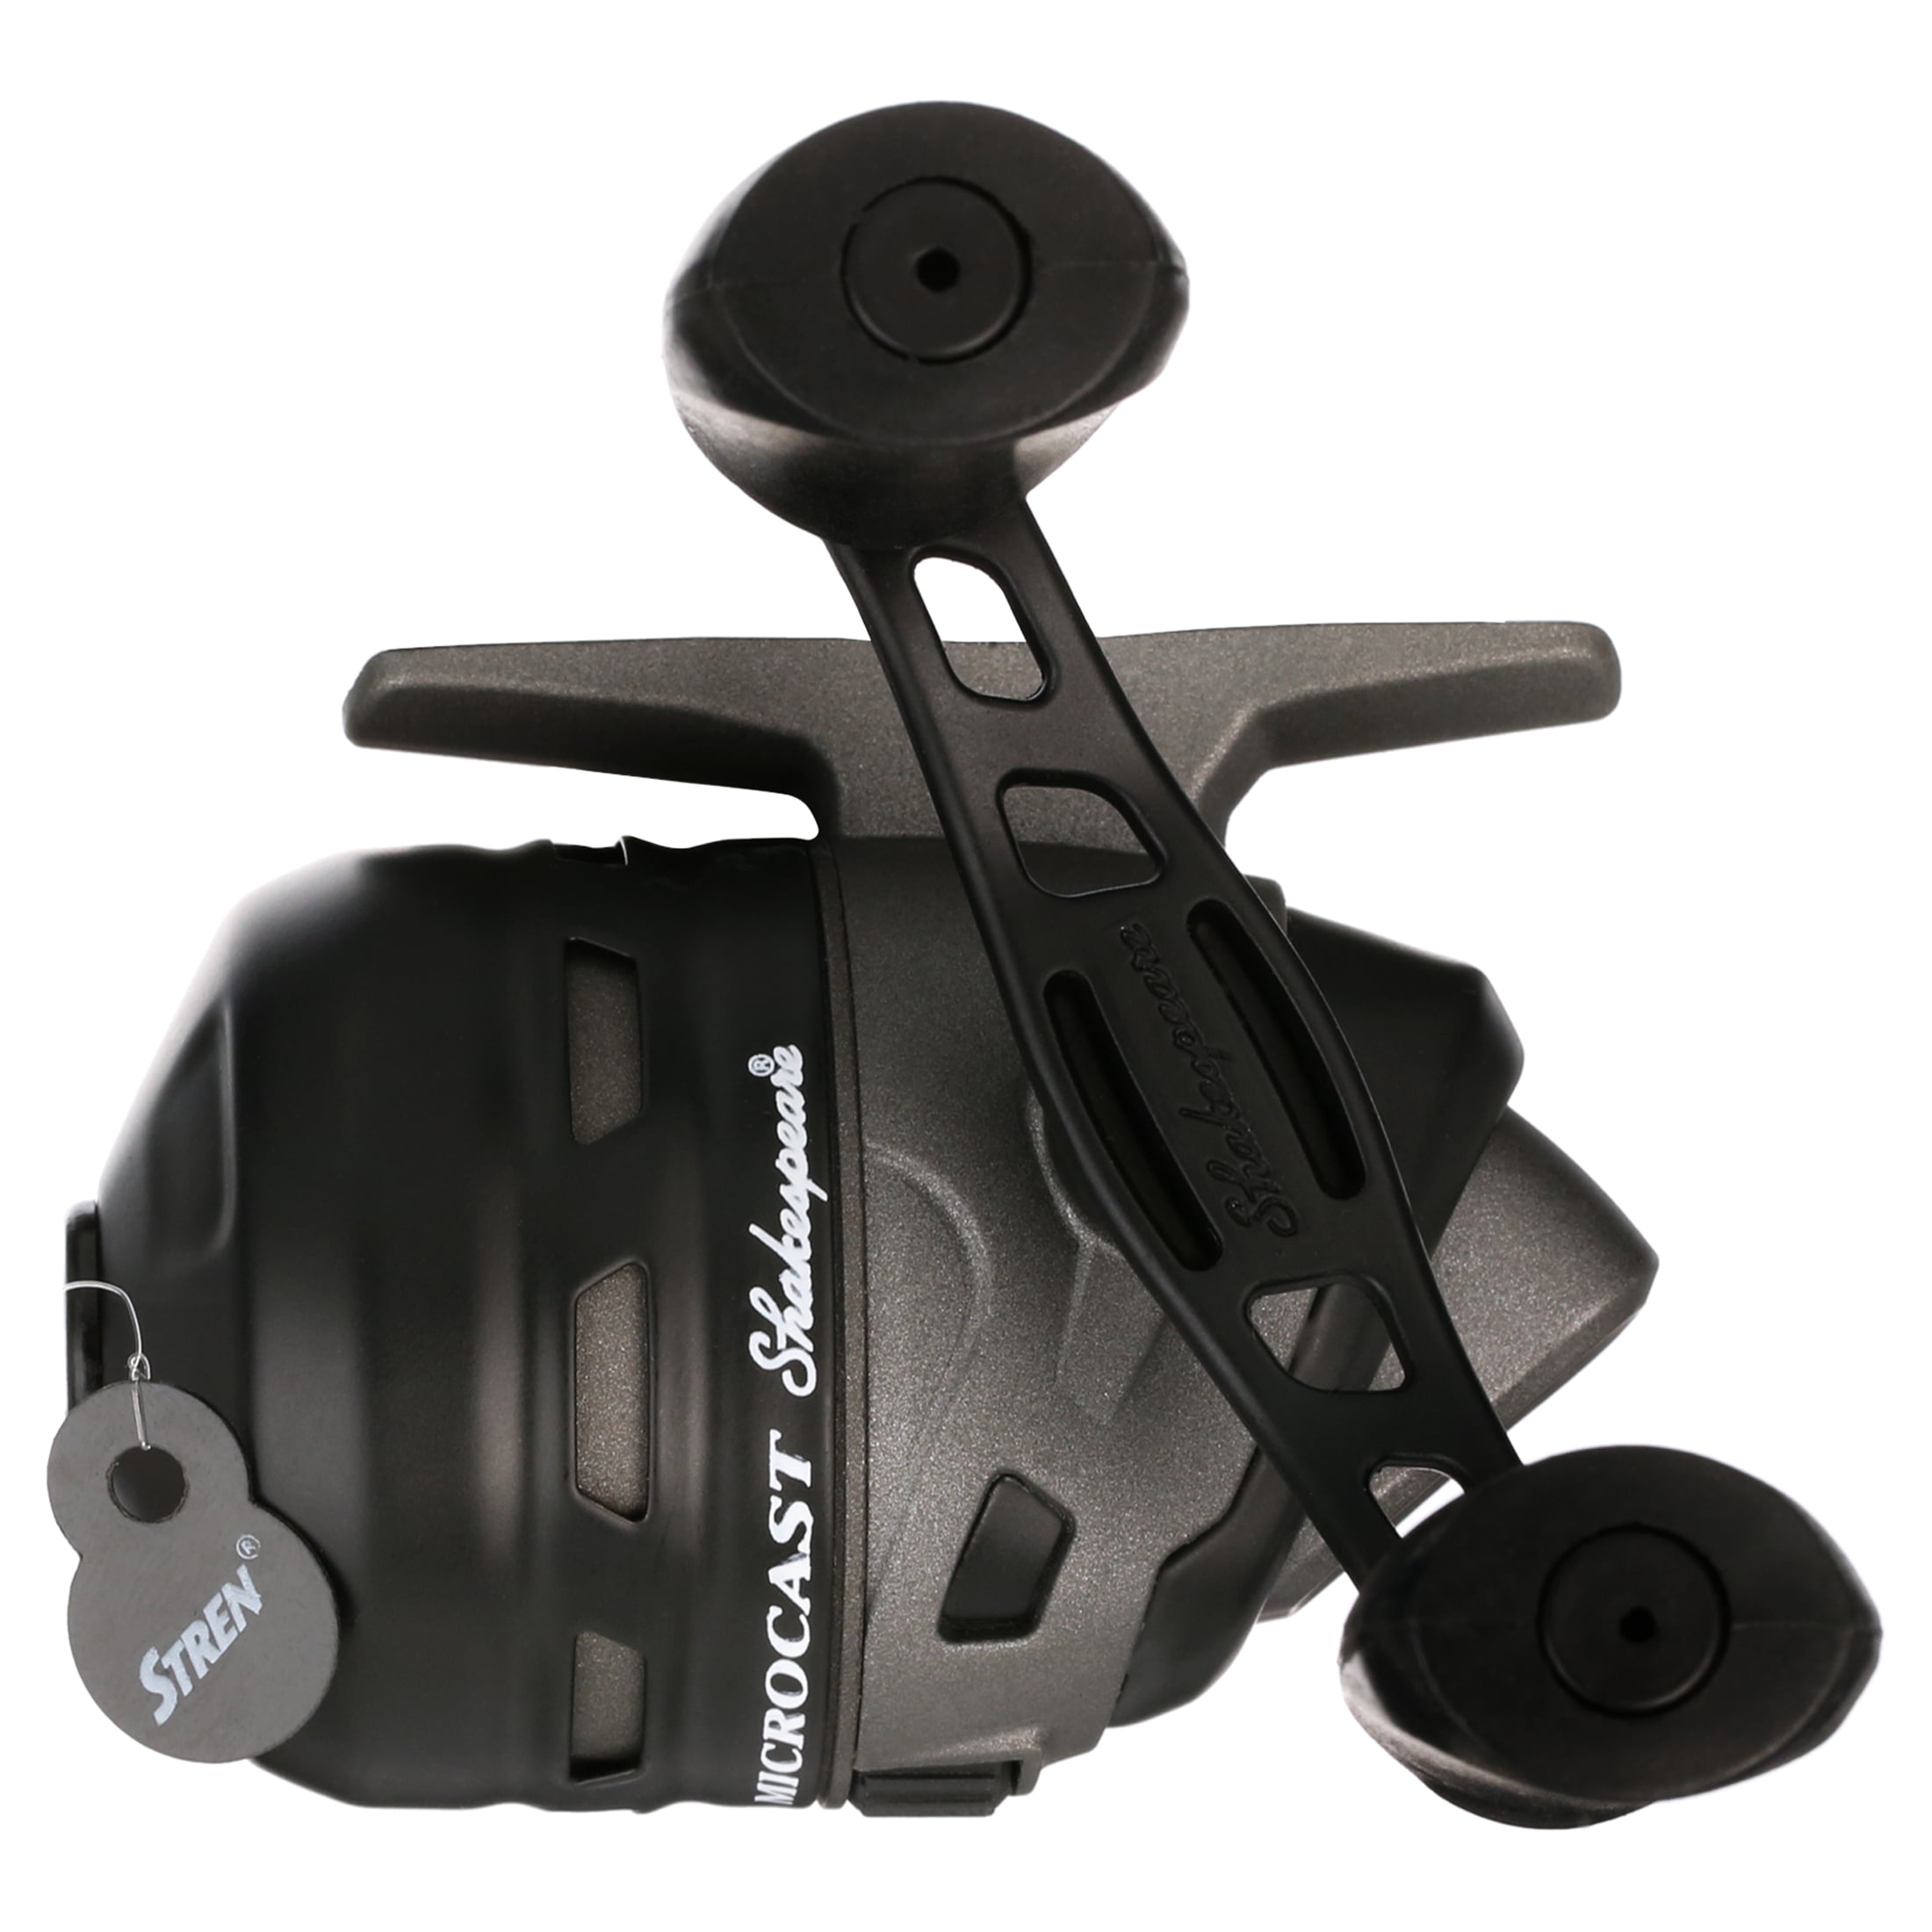 Shakespeare SYNST4X Synergy Steel Reel, Spincasting Reels 